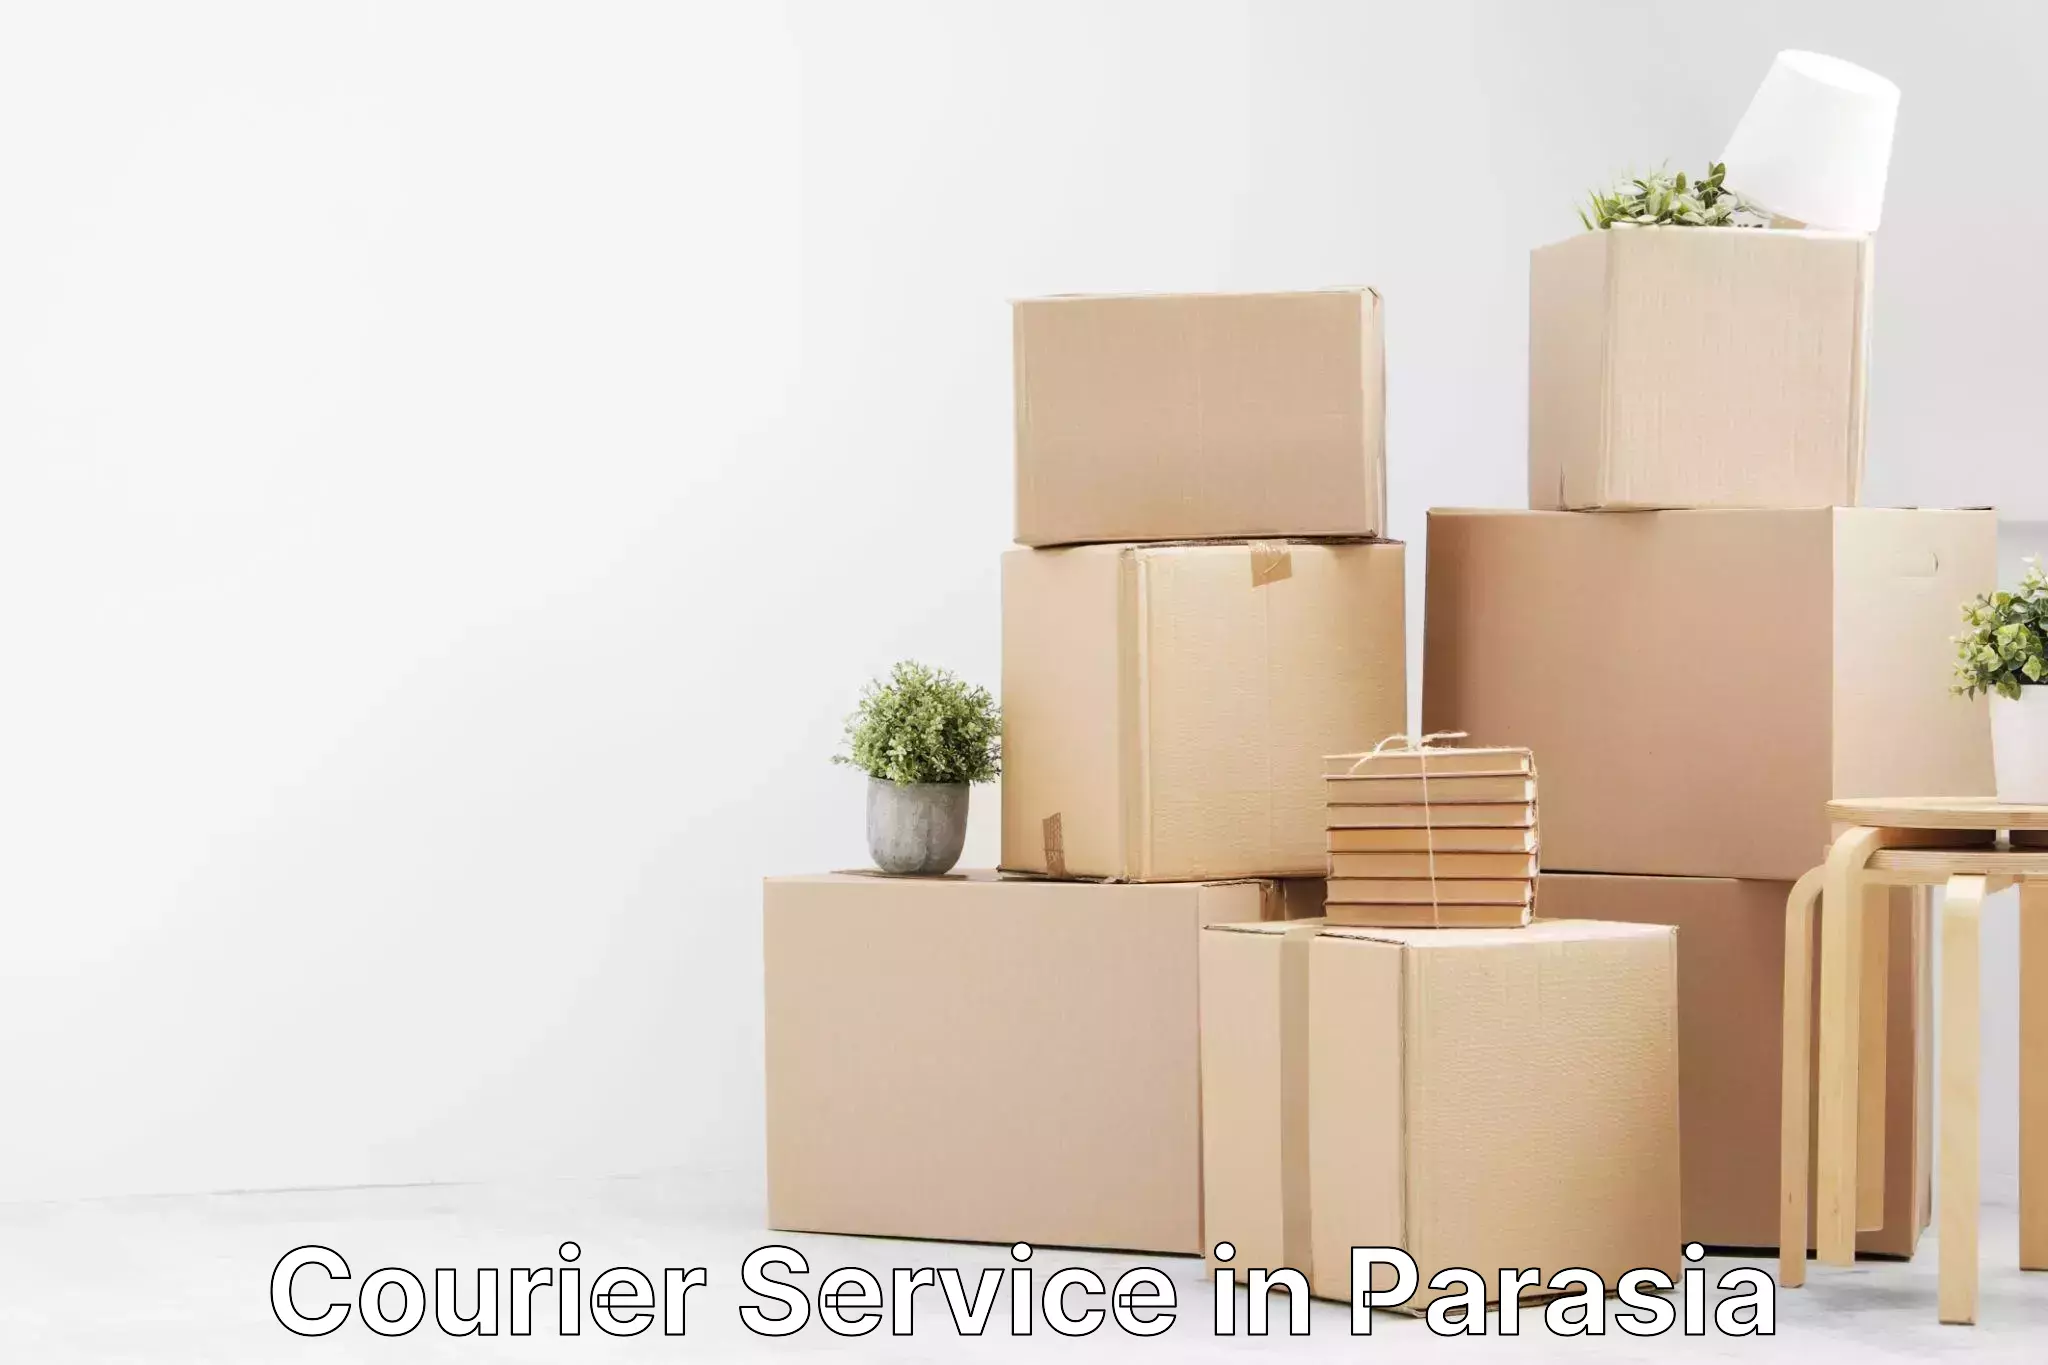 Personalized courier experiences in Parasia